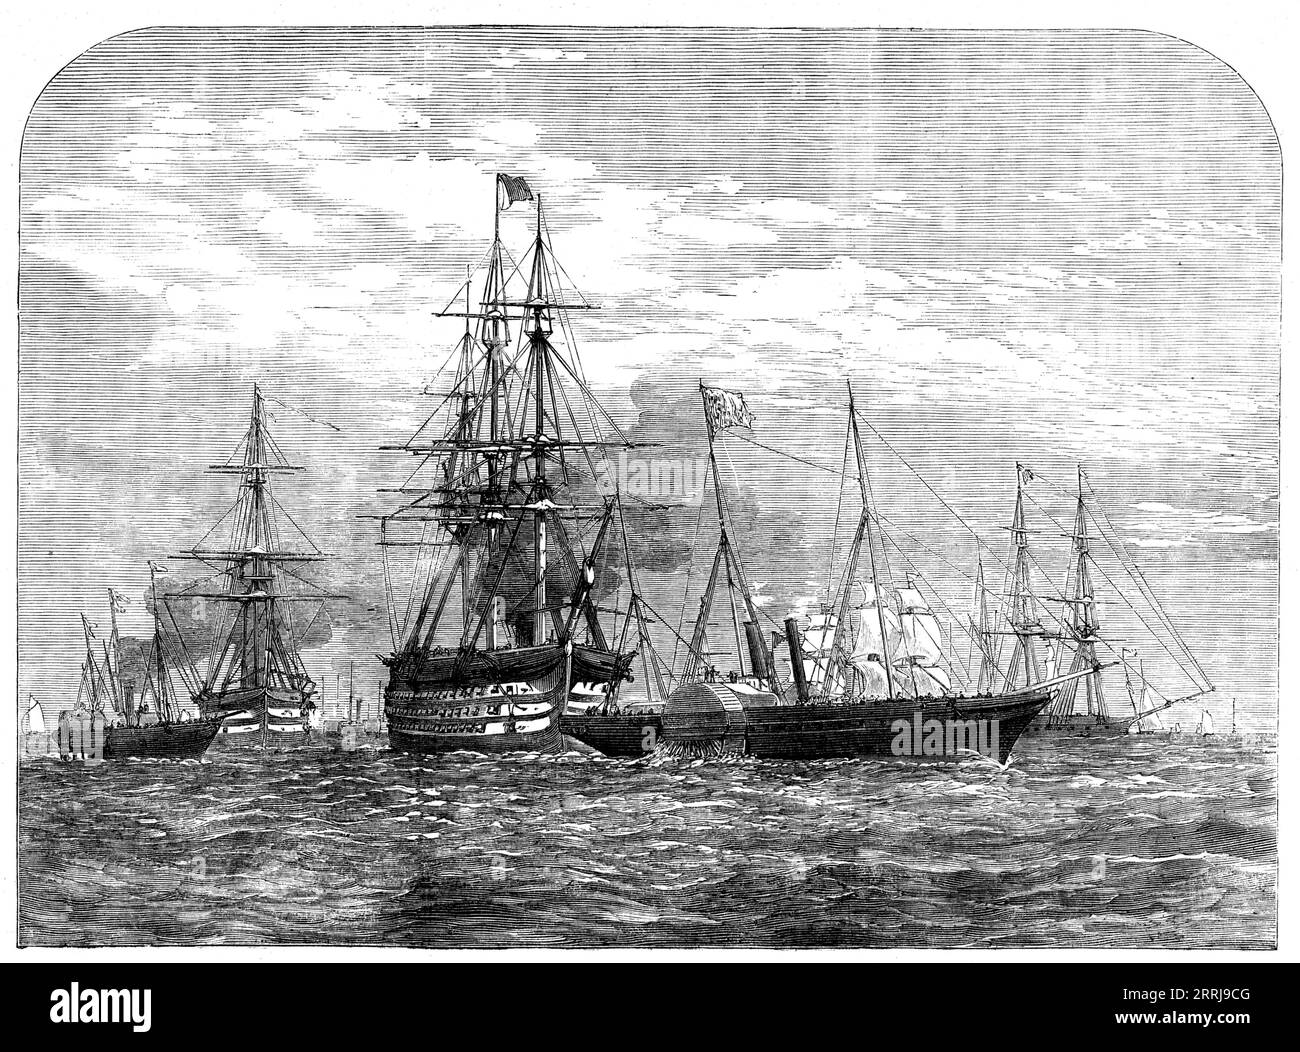 Her Majesty en route for Cherbourg, 1858. Queen Victoria travels '...to visit the Emperor and Empress of the French at Cherbourg, attended by a convoy befitting the head of a great maritime nation...The Pera, with some hundreds of the members of the House of Commons on board, got under way soon after daybreak on Wednesday morning at Southampton, and proceeded direct to Cherbourg...The escort squadron...consisted of the Royal Albert; the Renown; the Euryalus; the Diadem; the Cura&#xe7;oa; [and] the Racoon...At nine minutes past twelve the Victoria and Albert started for Cherbourg, the wind bein Stock Photo